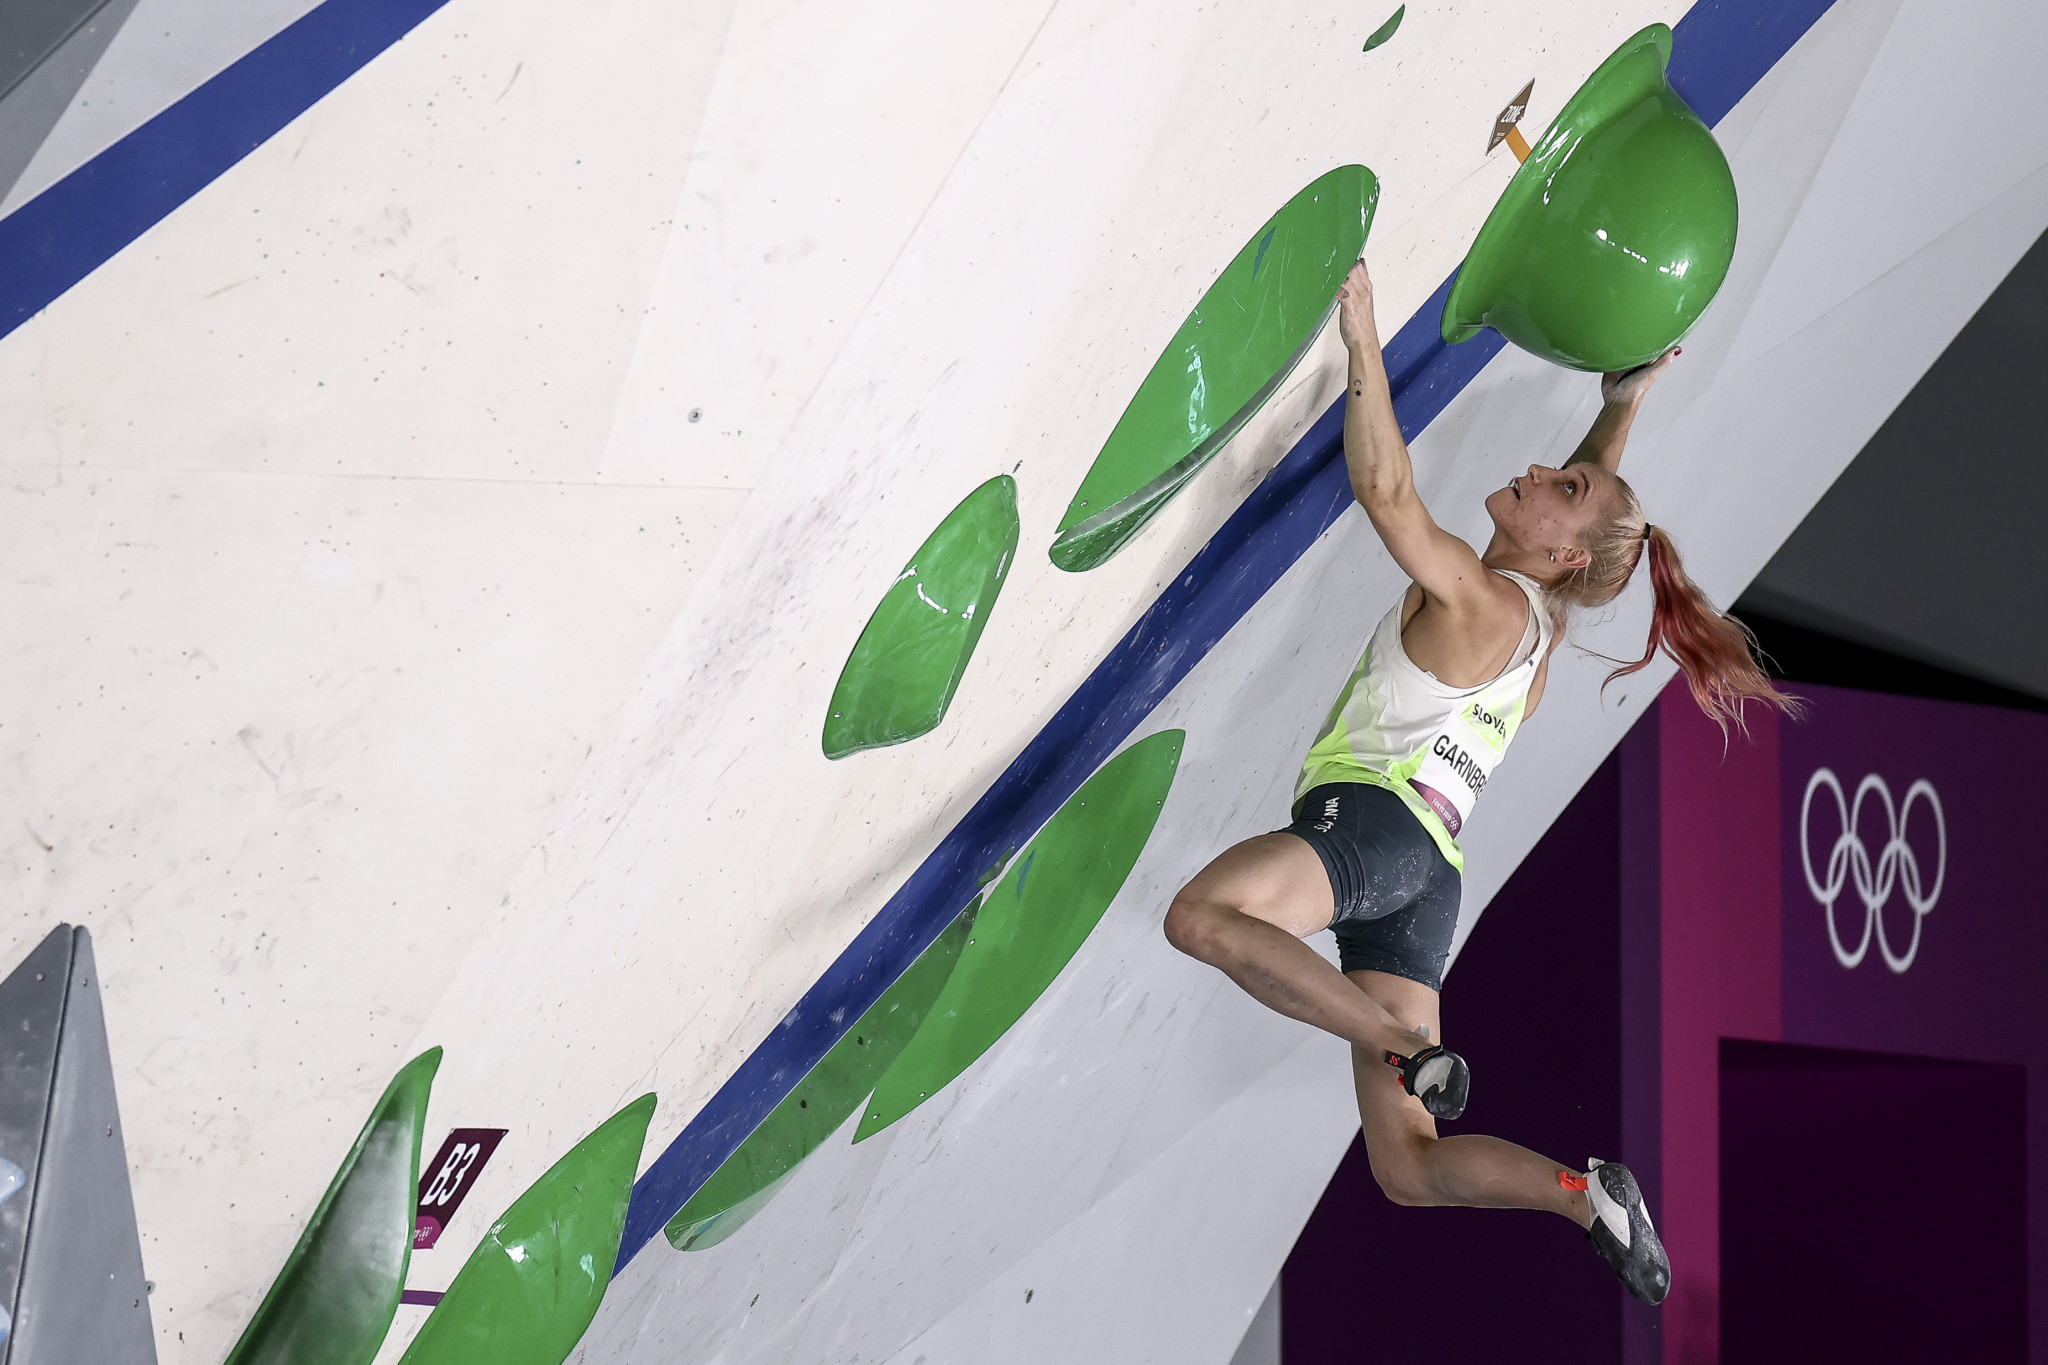 Sport climbing made its Olympic debut at Tokyo 2020 but some competitors were unhappy with the format adopted, which they believed was far from the sport's roots ©Getty Images